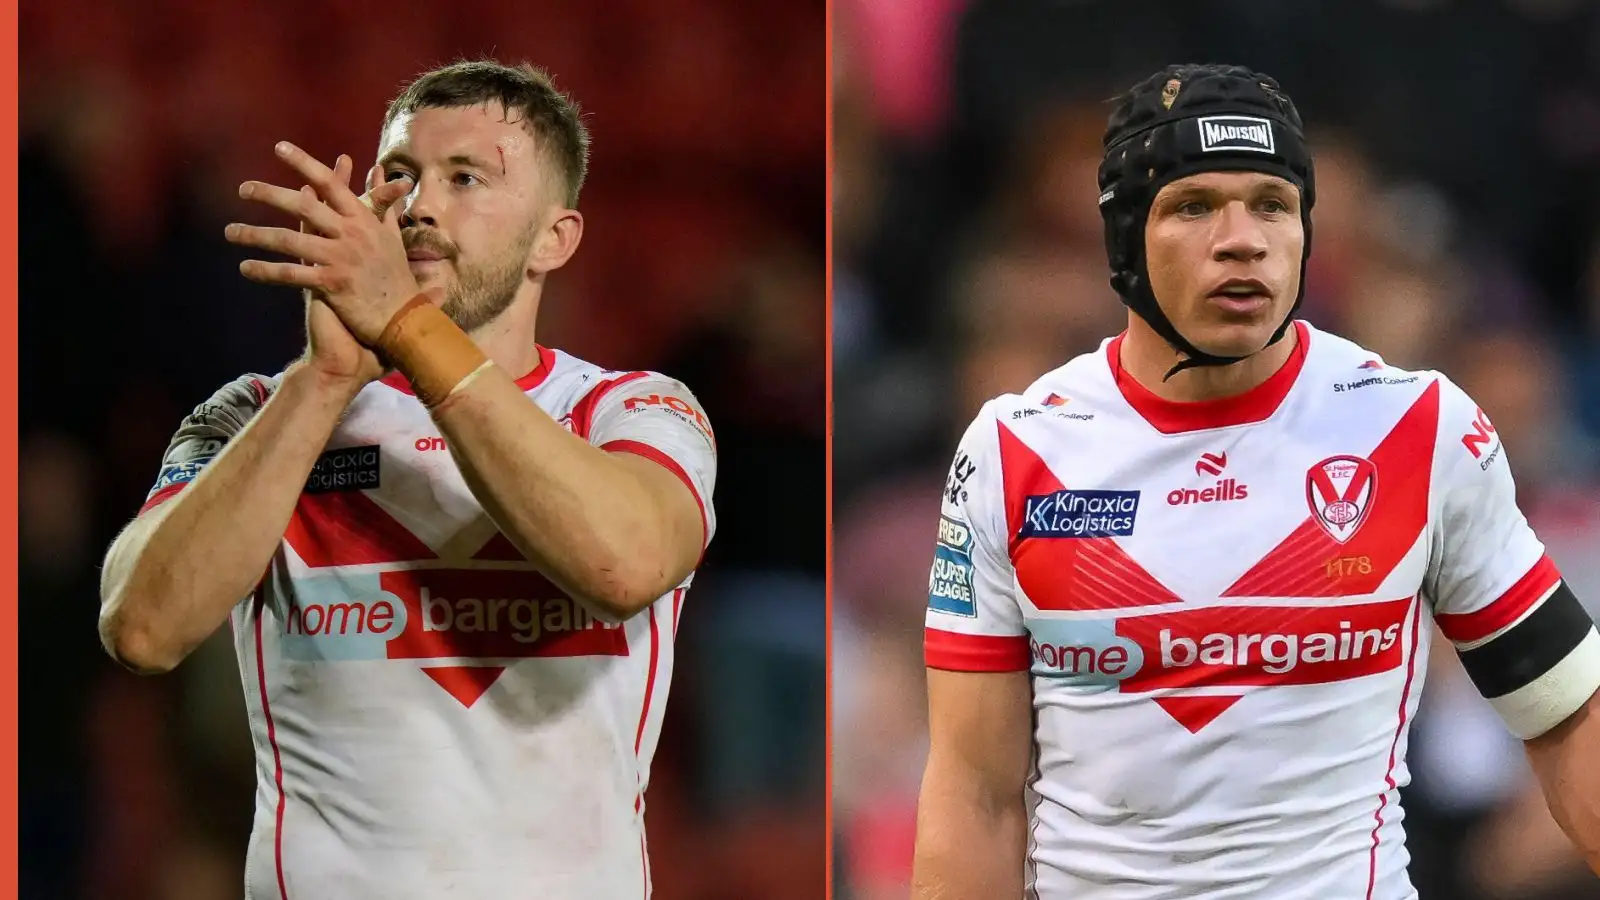 St Helens coach delivers mixed injury verdict on Jonny Lomax and Joe Batchelor